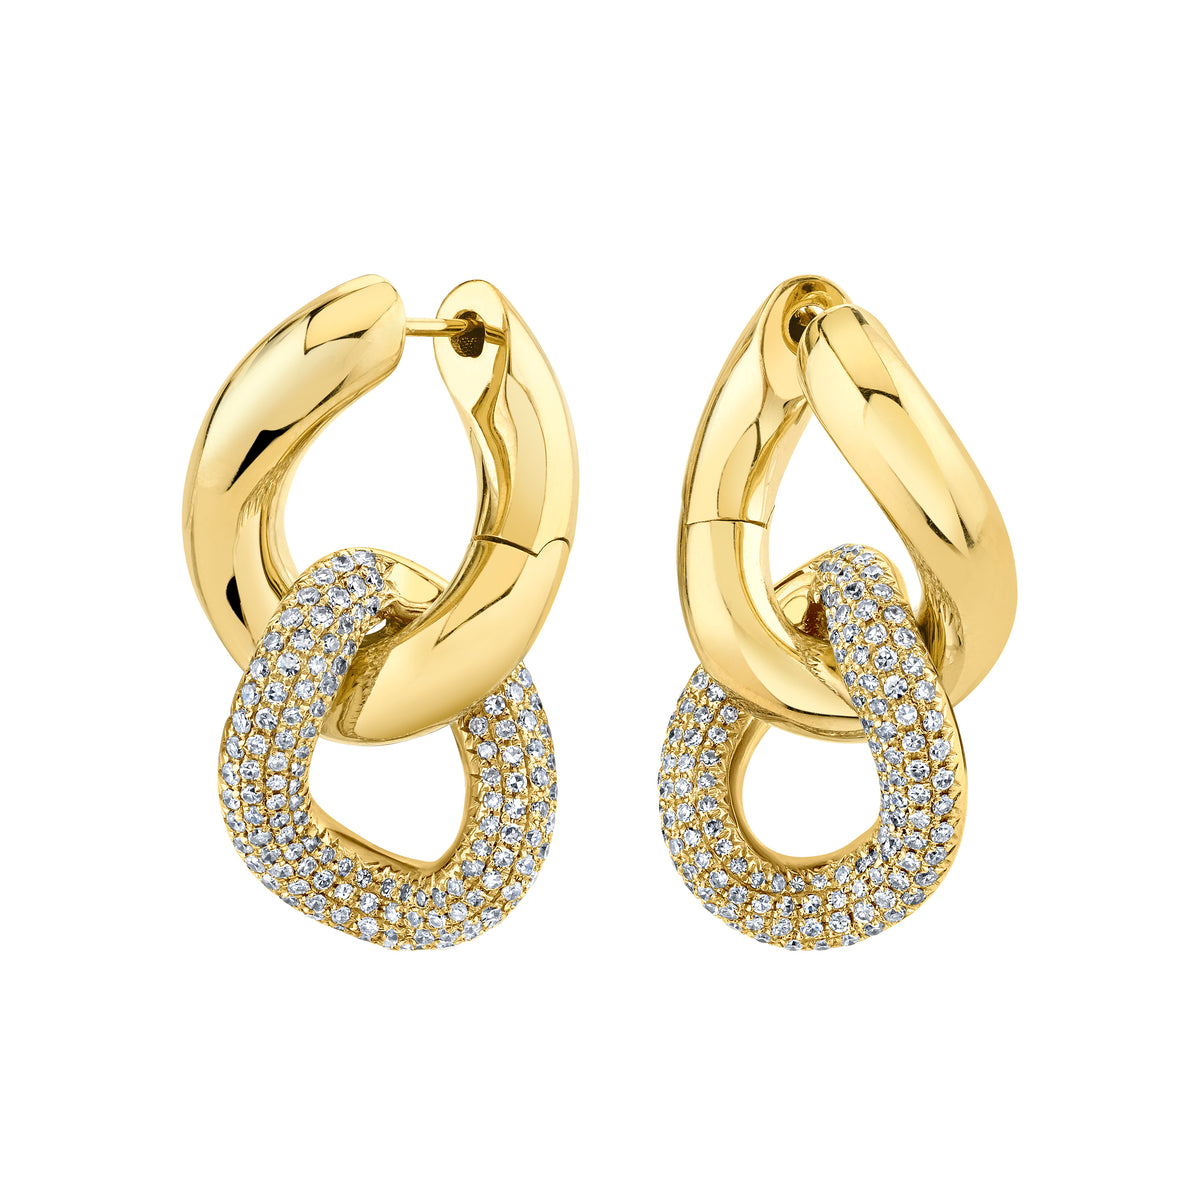 DIAMOND DOUBLE PAVE GOLD LINK EARRINGS